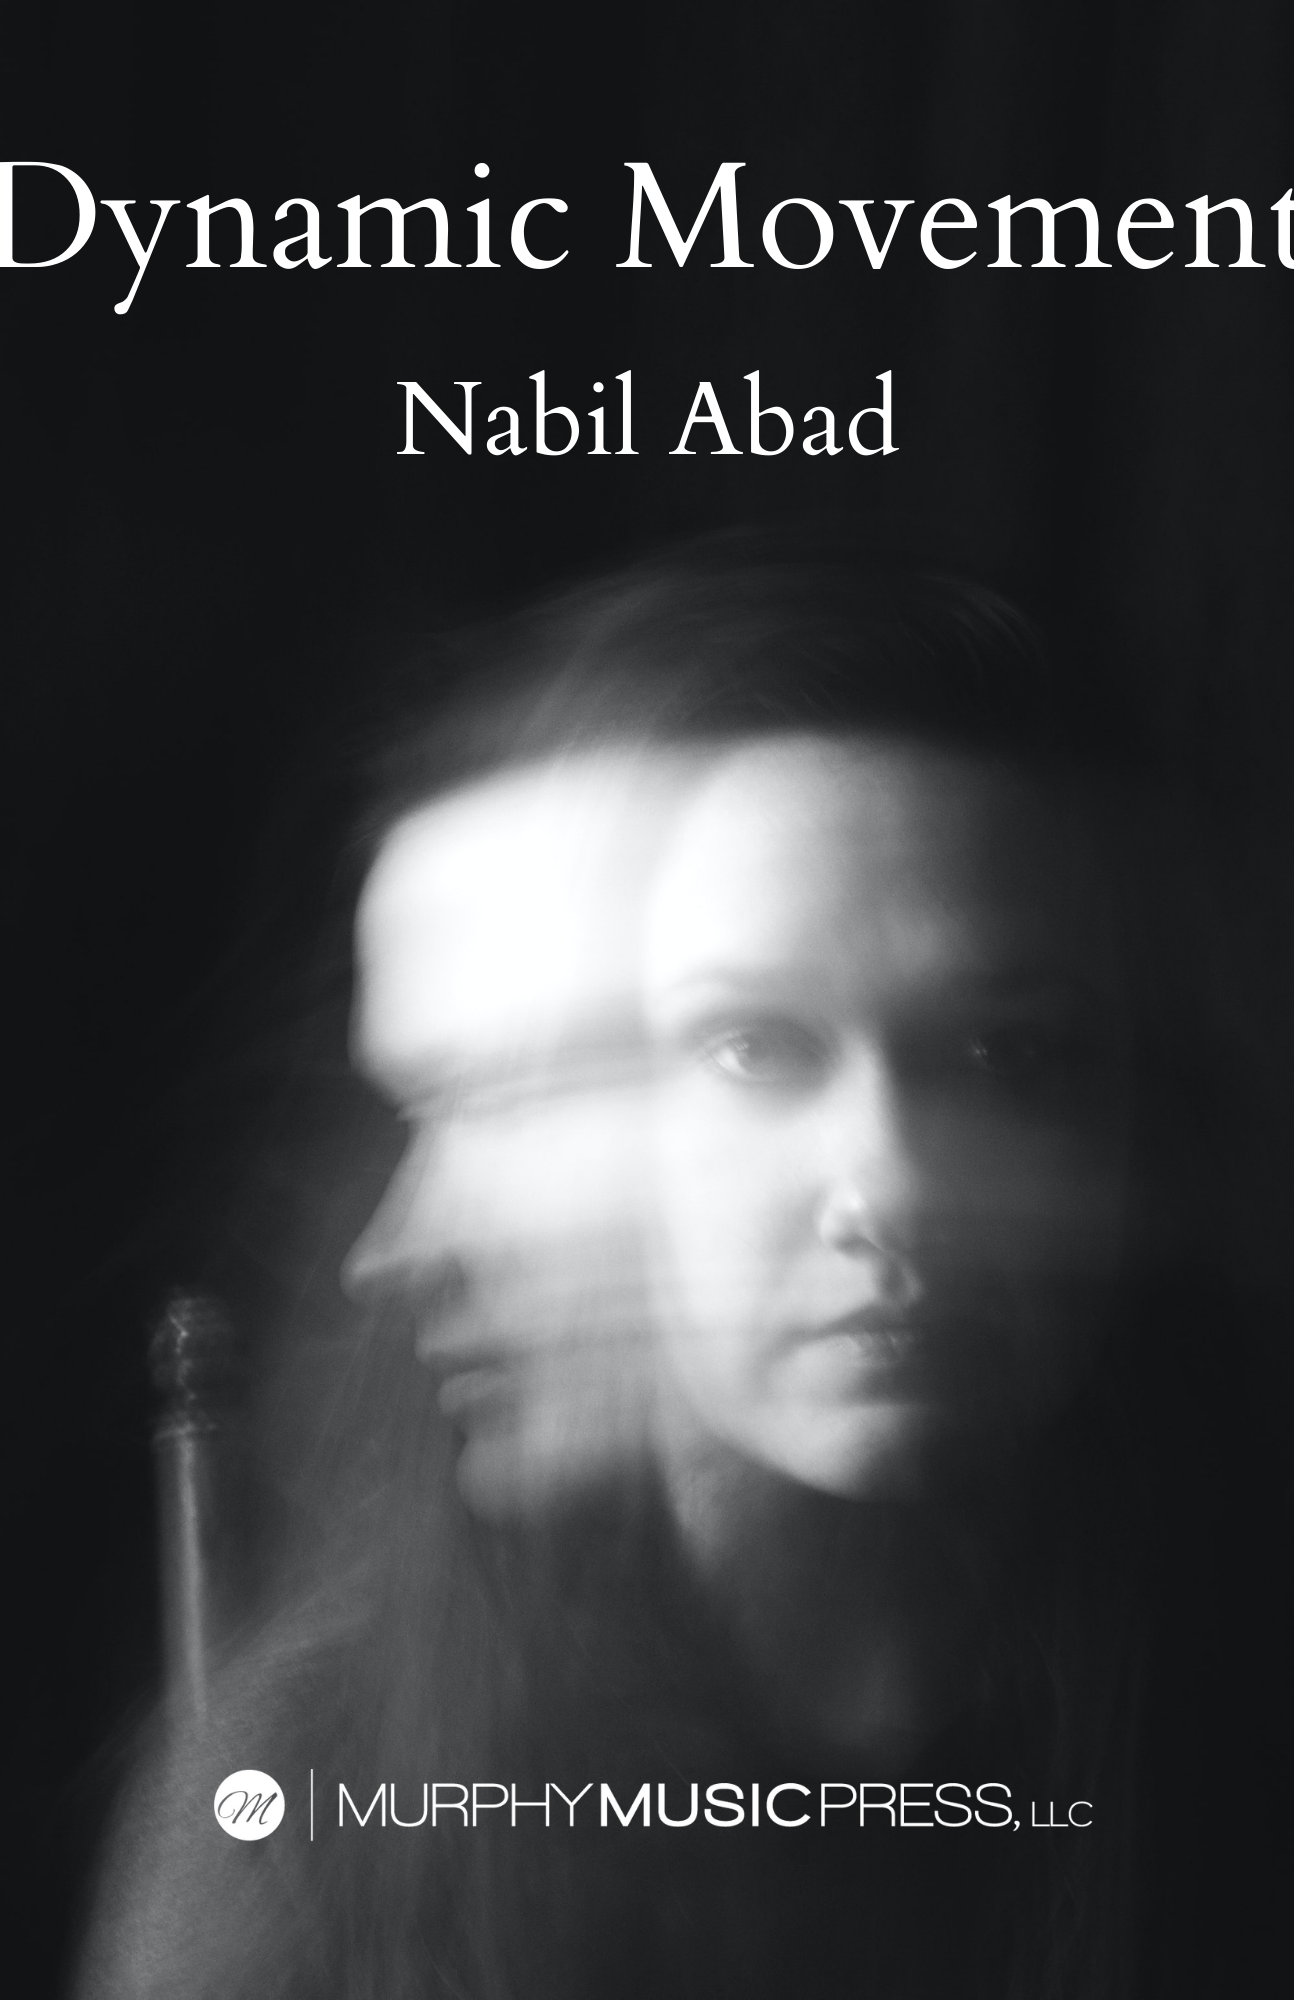 Dynamic Movement by Nabil Abad